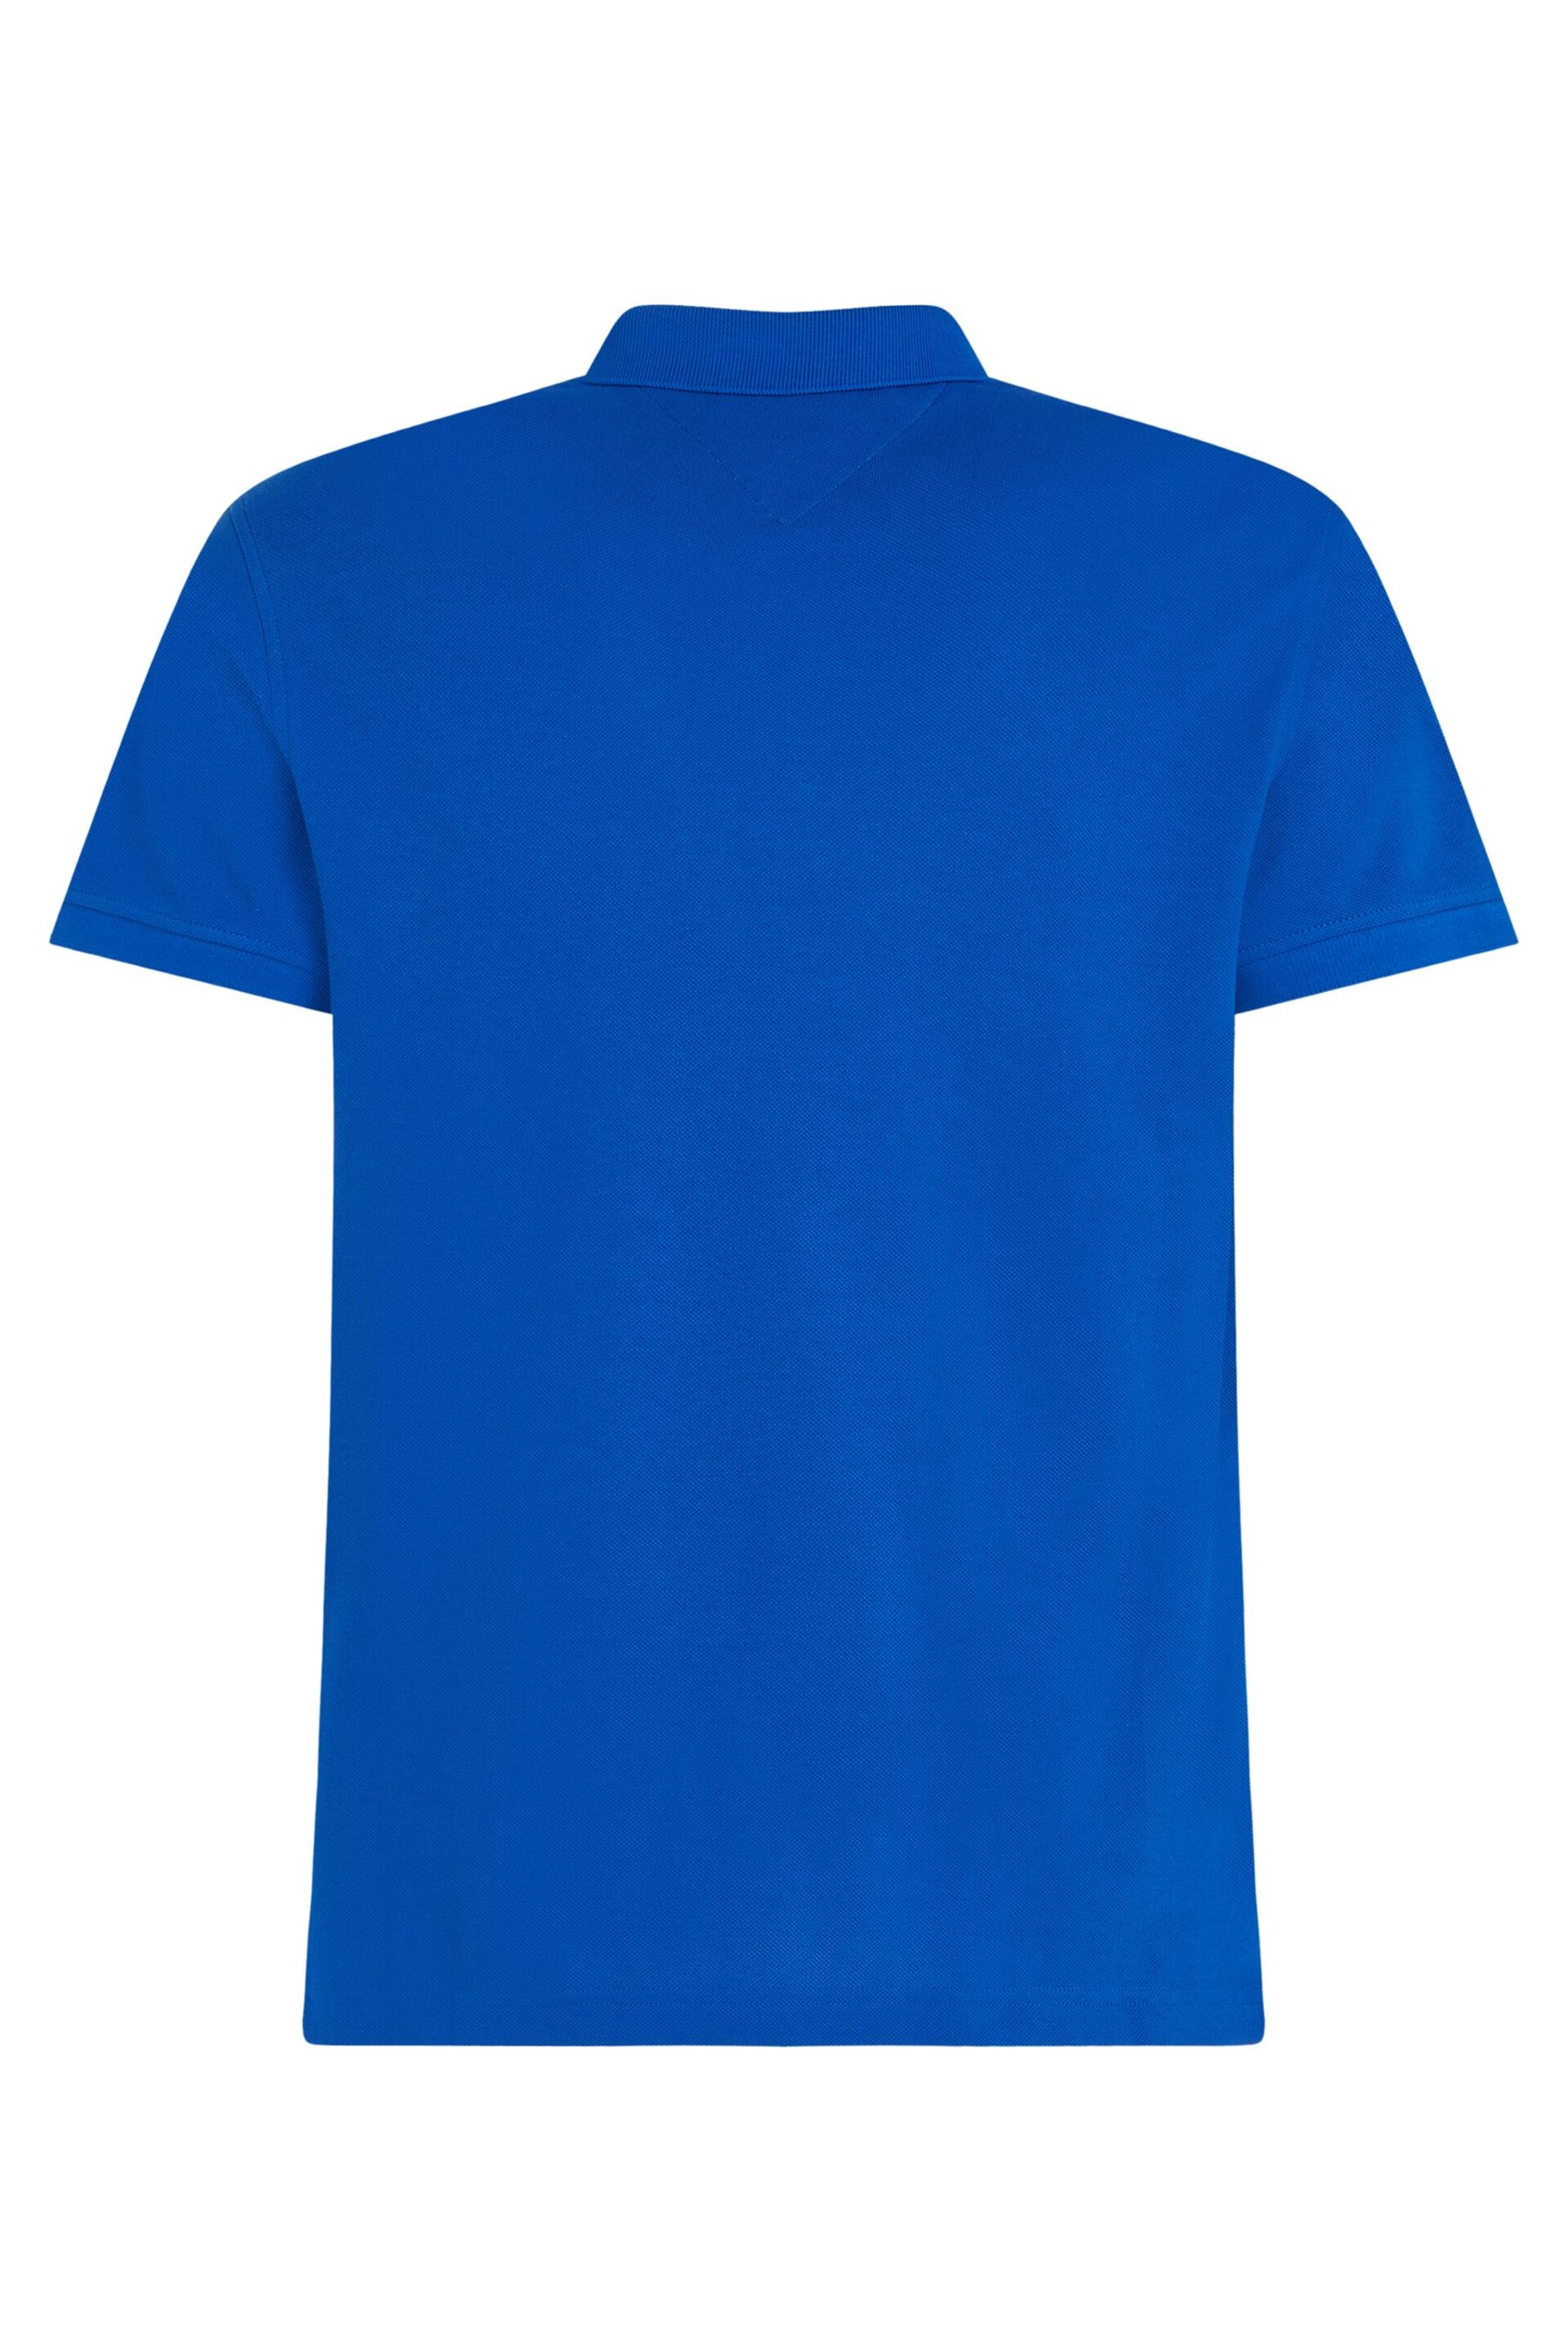 Tommy Hilfiger Slim Fit Blue Polo Shirt - Image 5 of 6